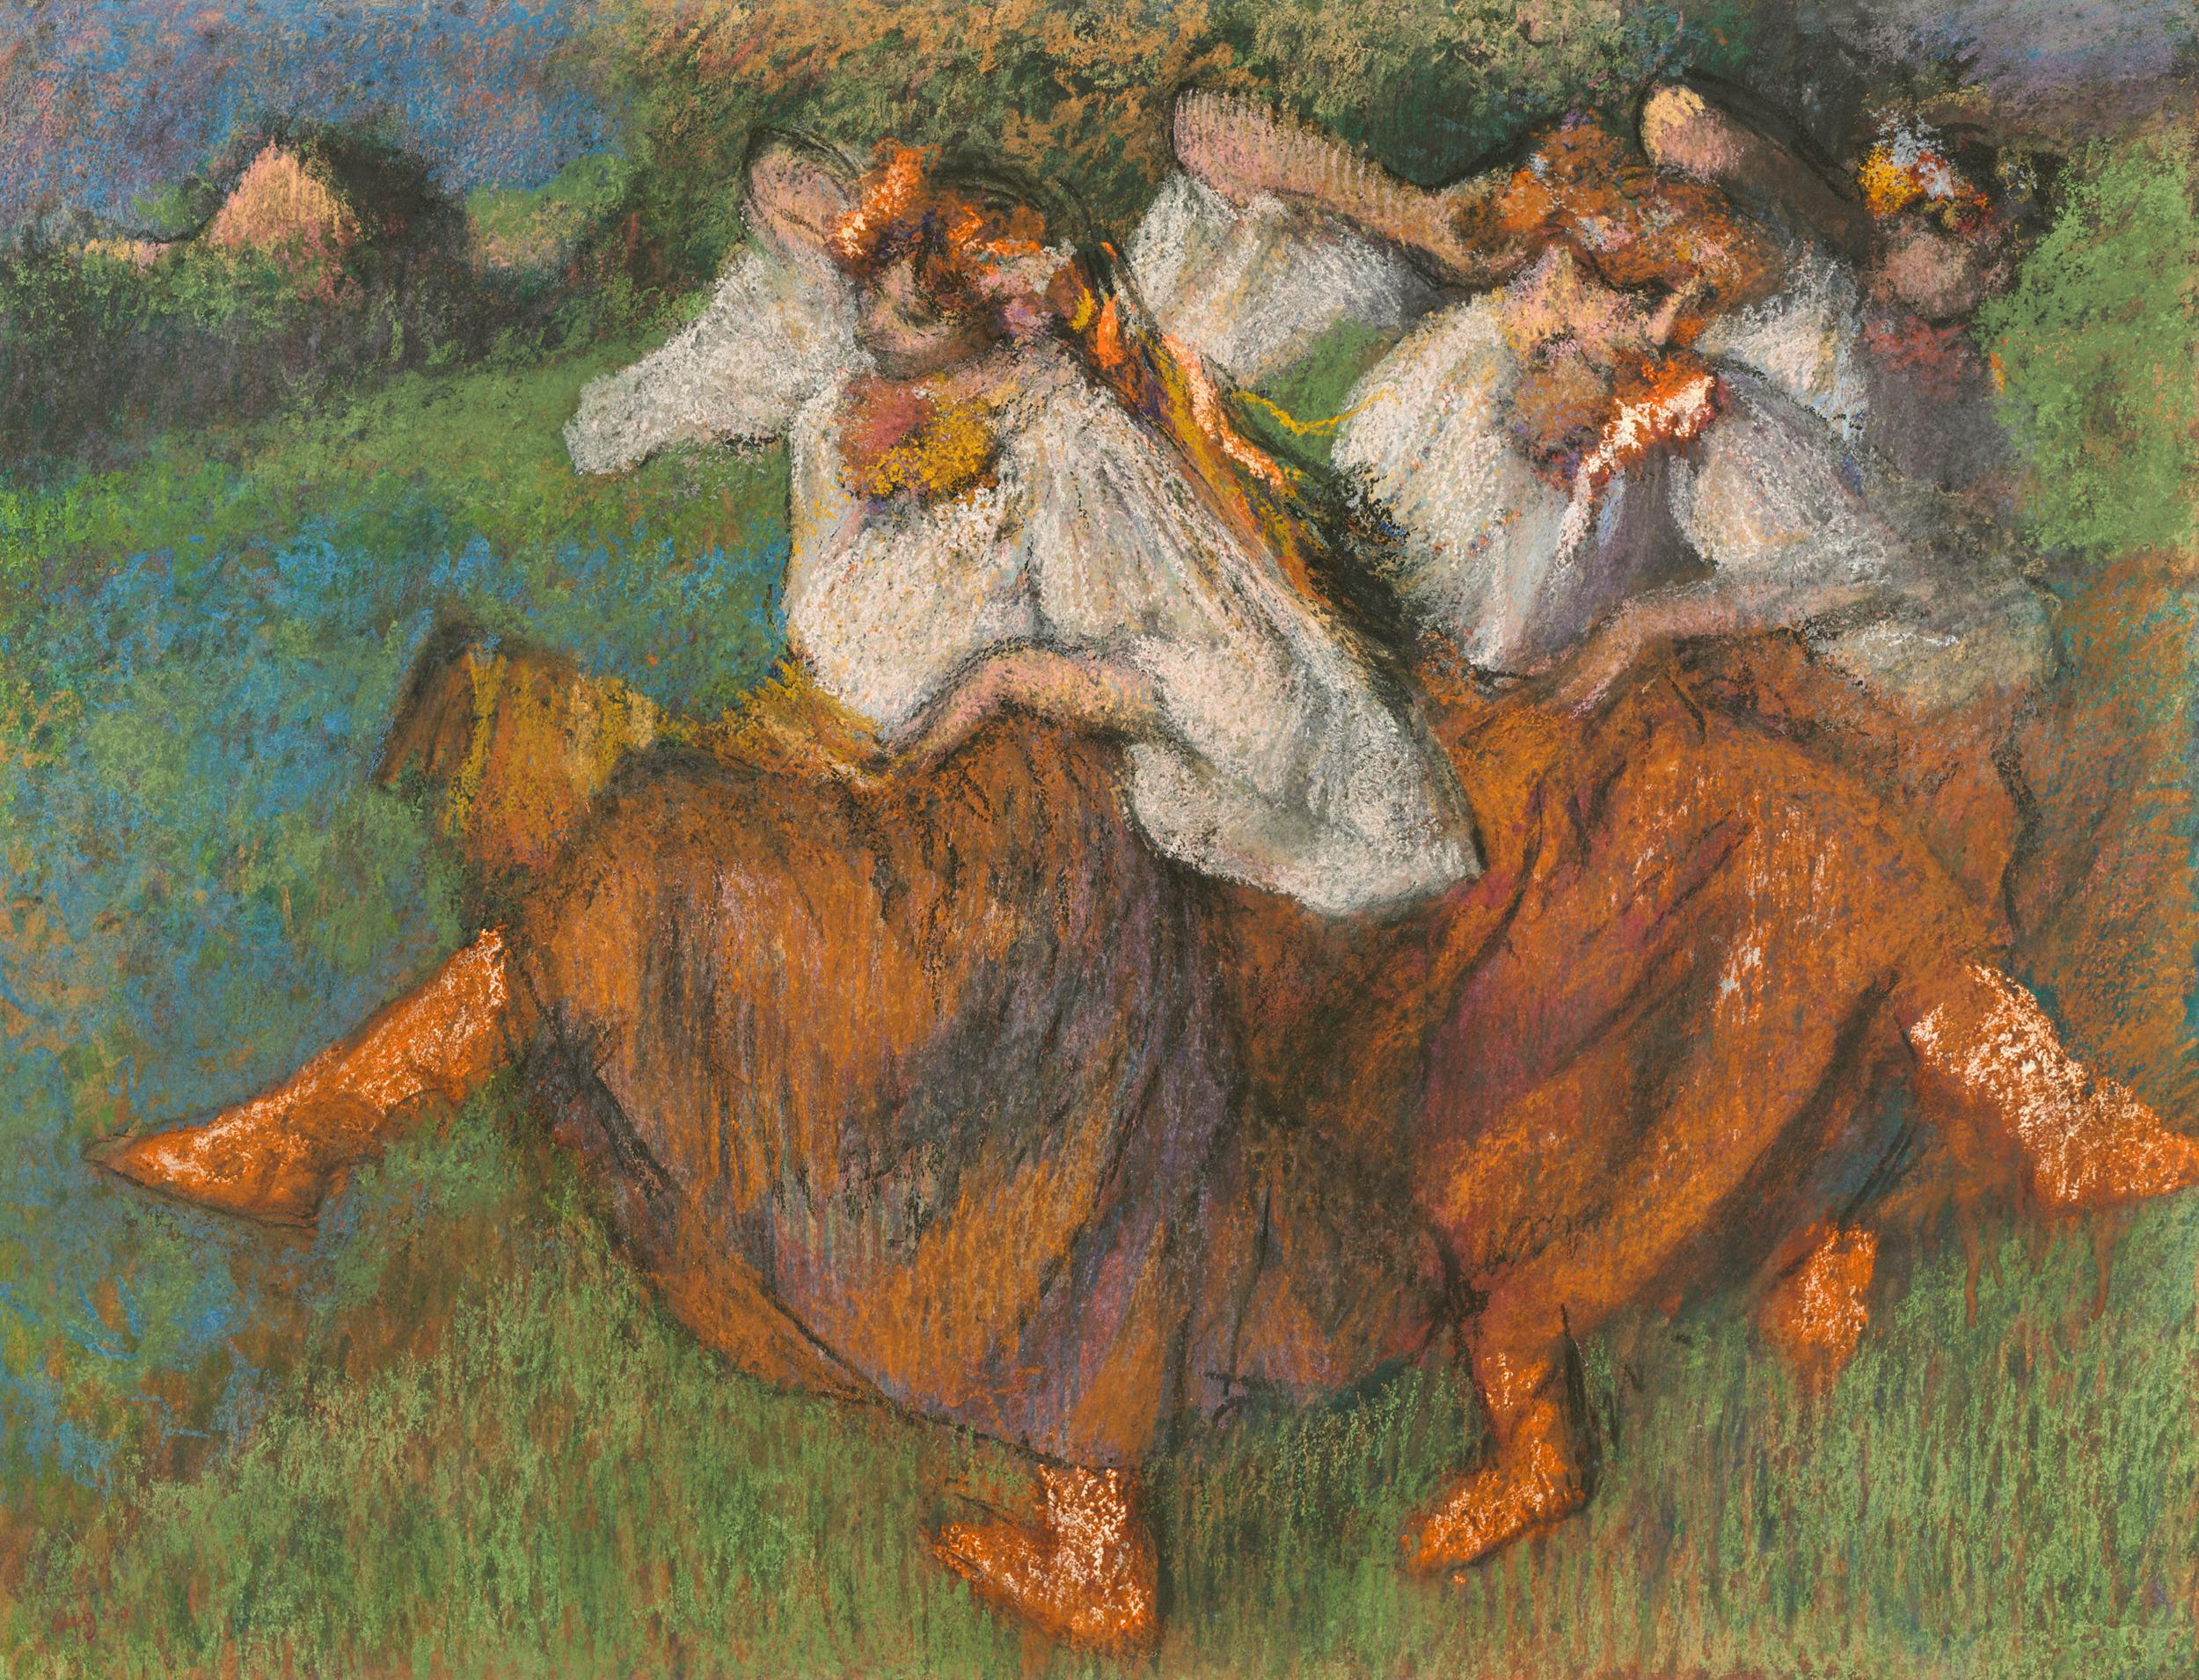 Edgar Degas
1834-1917  French

Ukrainian Dancers

Stamped "Degas" (lower left)
Charcoal and pastel on tracing paper mounted on cardboard

“I’m going to show you the orgies of color that I’m working on at the moment.” - Edgar Degas to Julie Manet, on